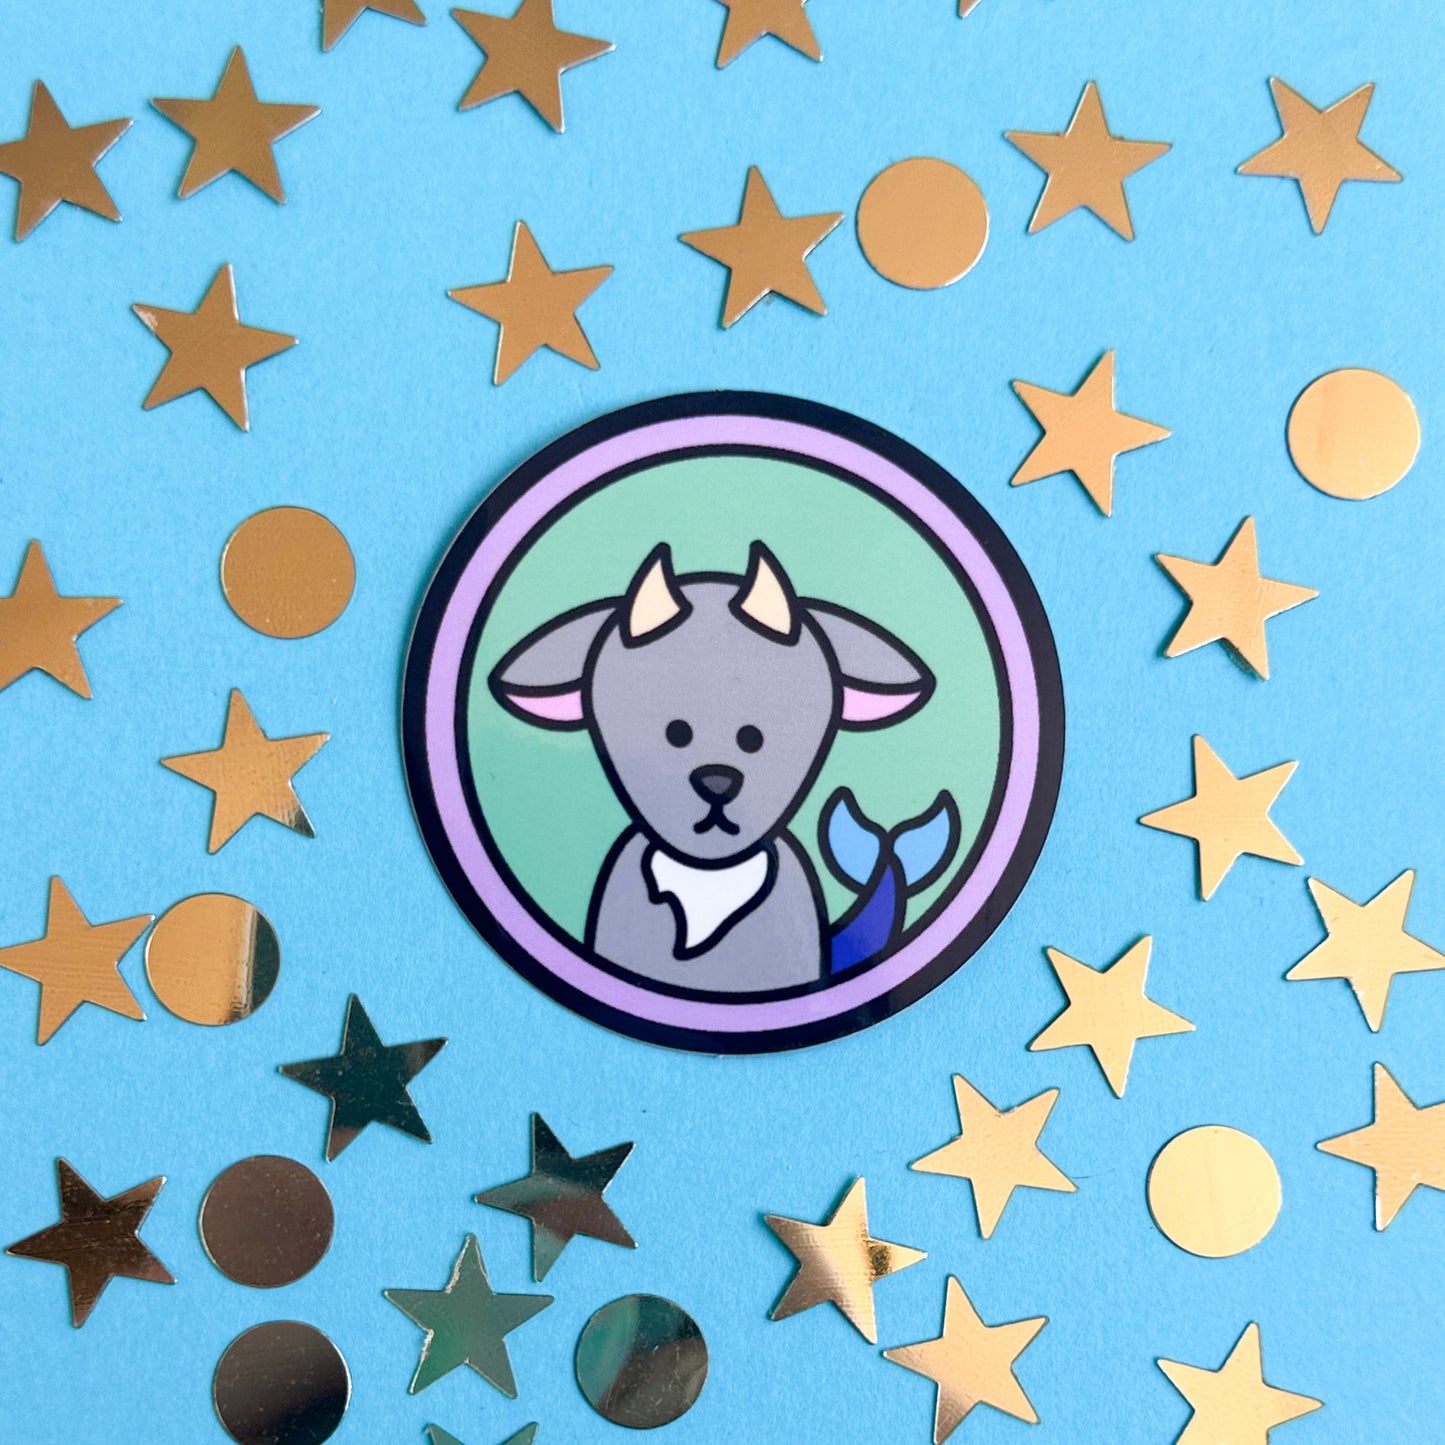 A circle sticker with a cute illustration of a sea goat representing Capricorn as an astrology sign. The sticker is on a blue background surrounded by gold stars and circles. 